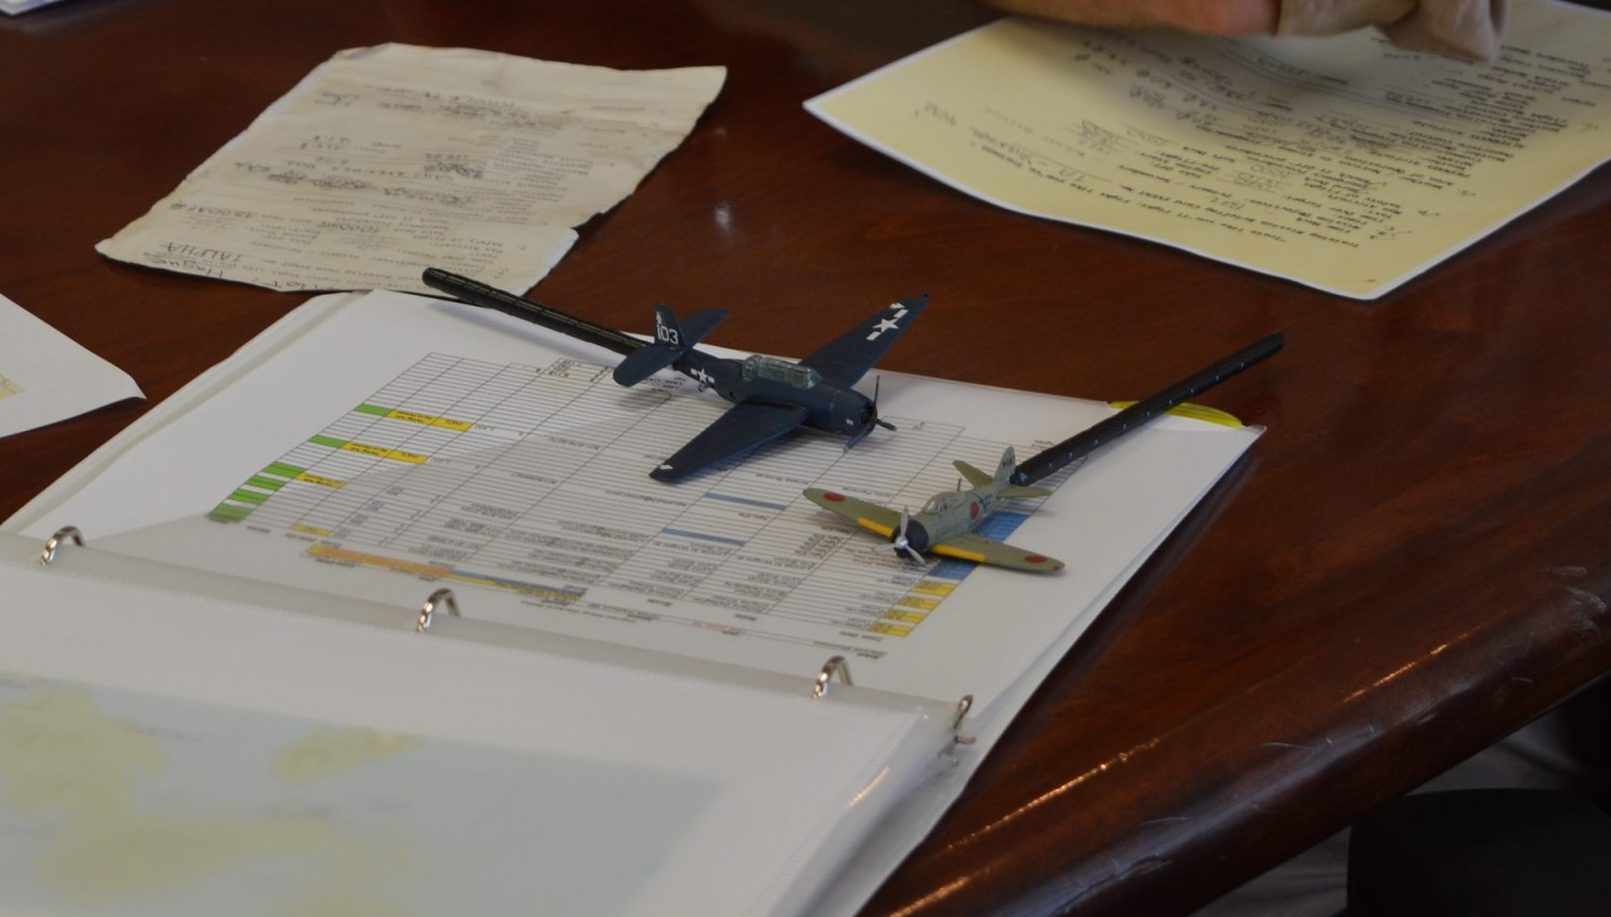 Two model planes were used to demonstrate evasive maneuvering for each torpedo mission at the 2021 Commemorative Air Force Warbirds Showcase in Frederick, MD. (credit Anthony C. Hayes/BPE)